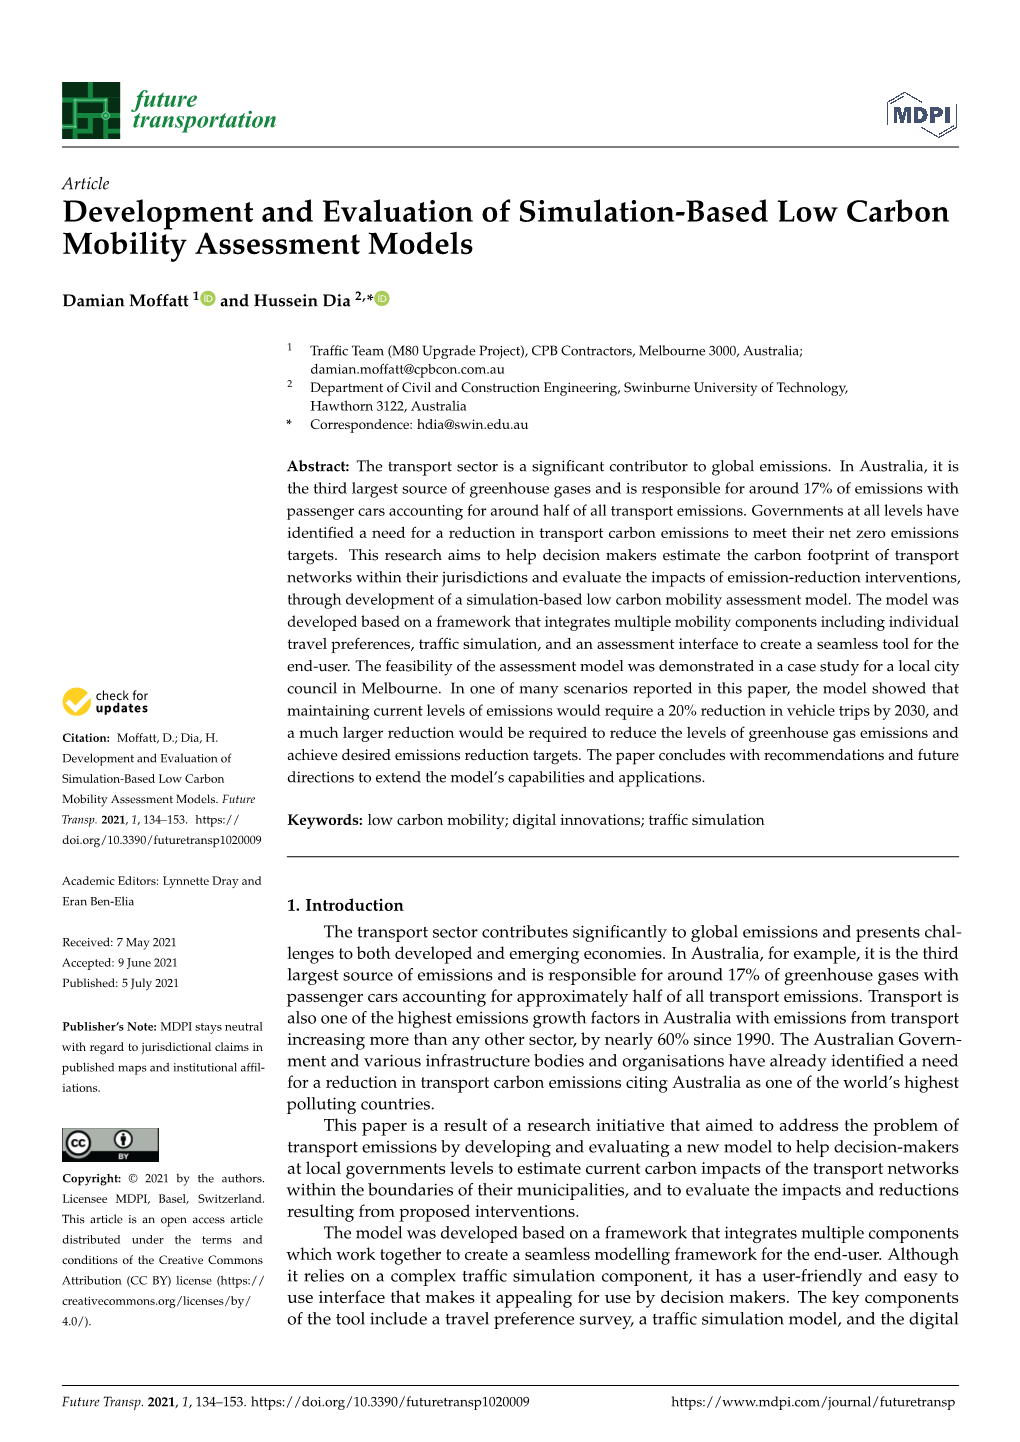 Development and Evaluation of Simulation-Based Low Carbon Mobility Assessment Models